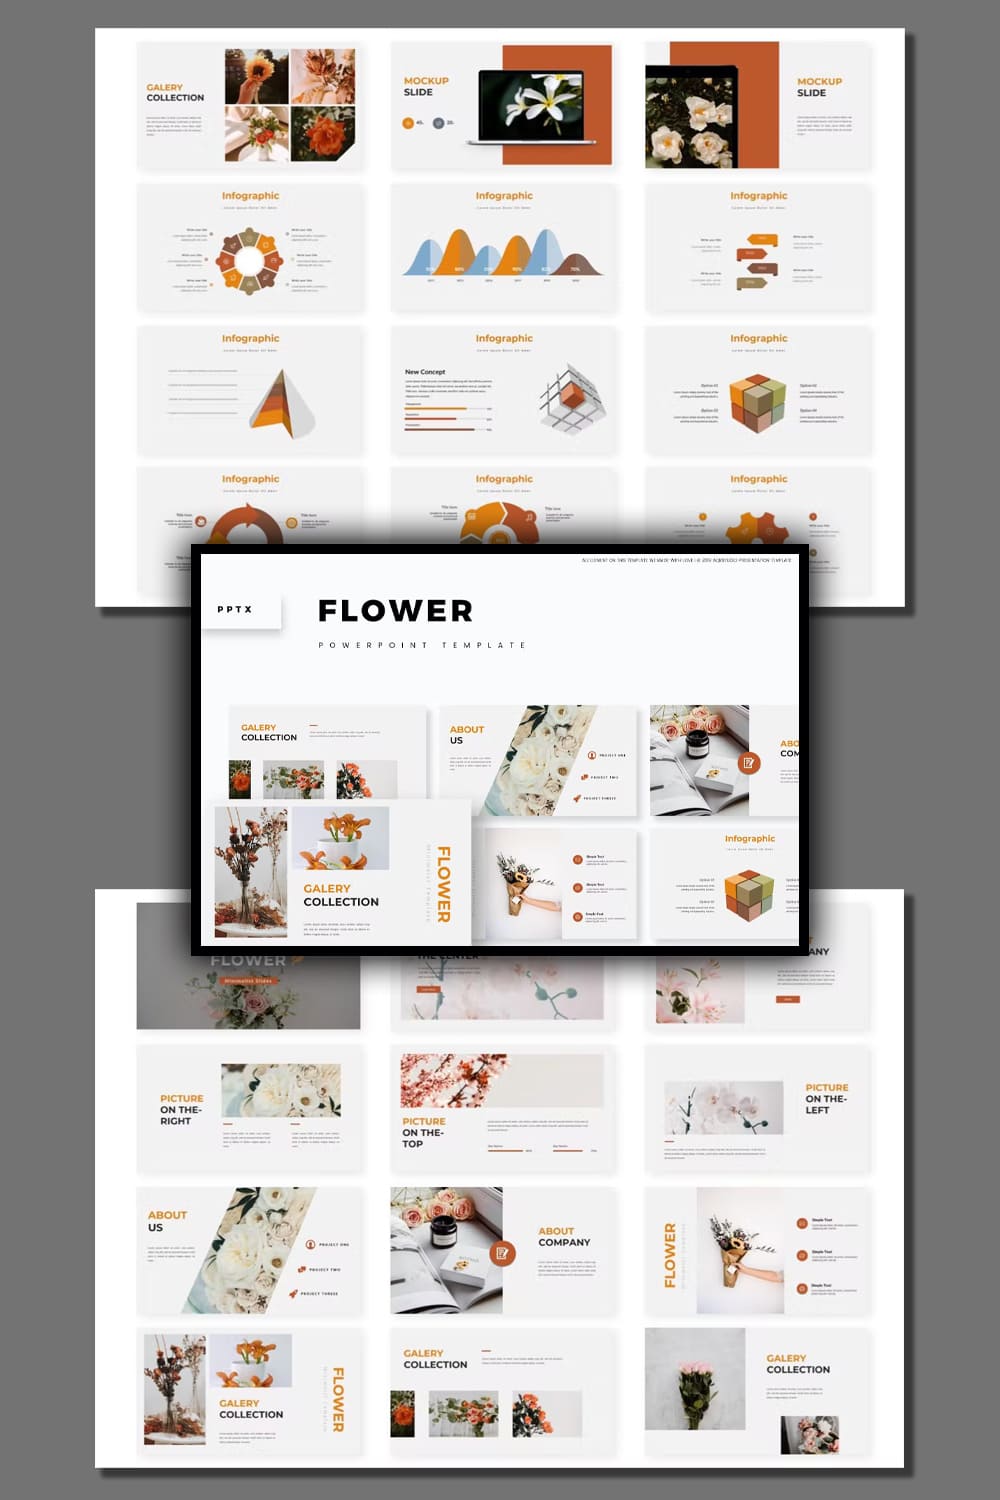 Collection of images of irresistible presentation template slides on the theme of flowers.